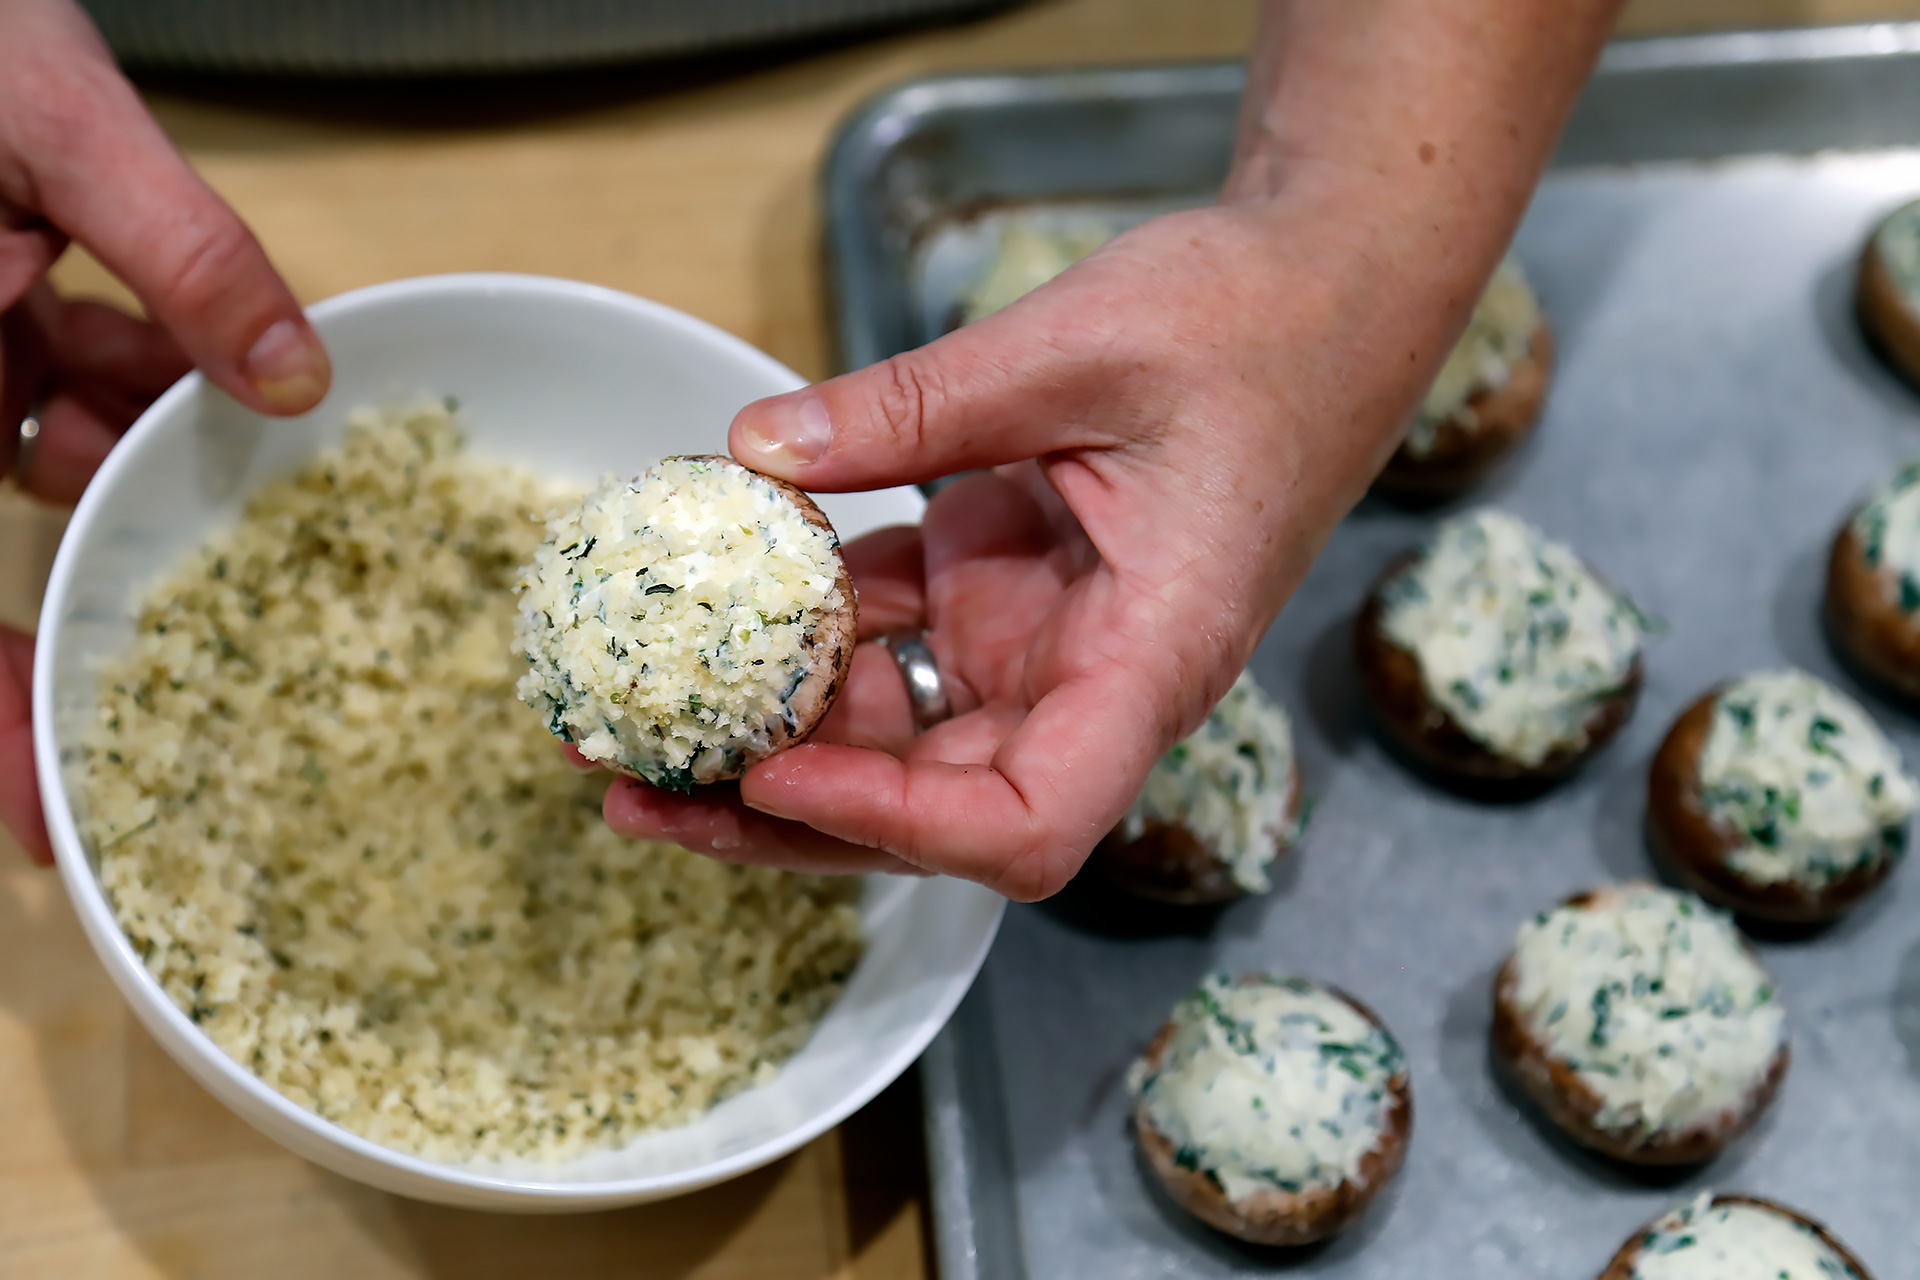 Top the stuffed mushrooms with the panko mixture, pressing it into the filling lightly.